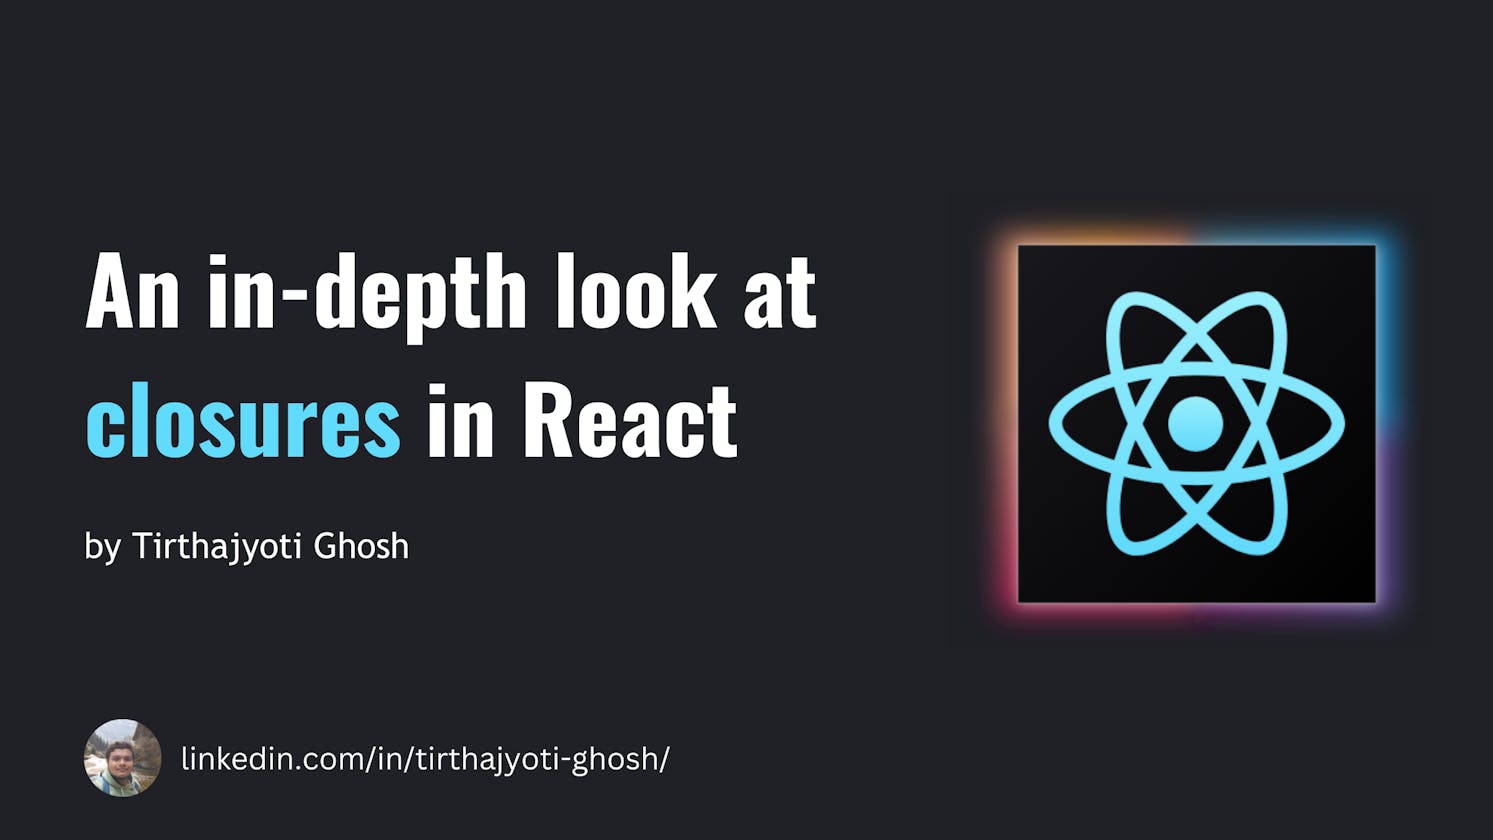 An in-depth look at closures in React